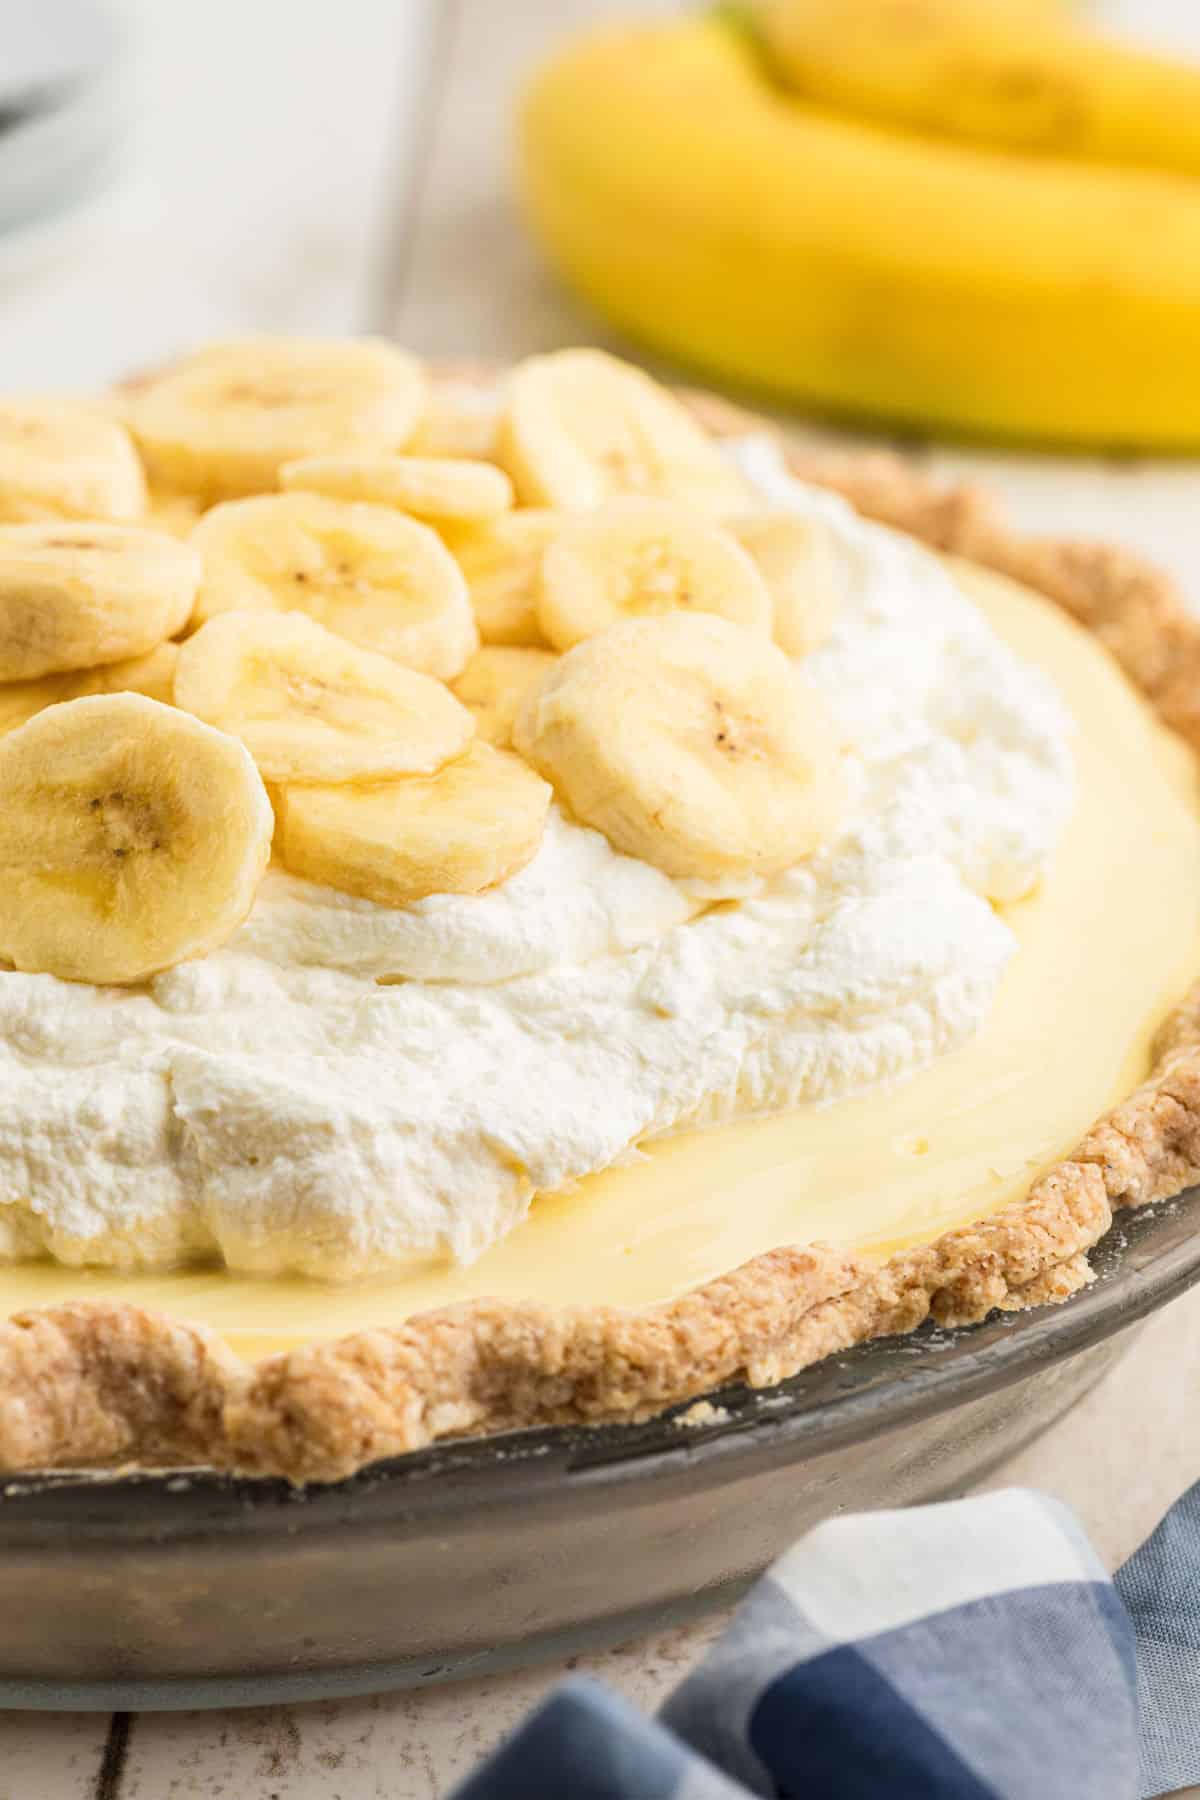 Side view of a dish full of banana cream pie, with some bananas in the background.